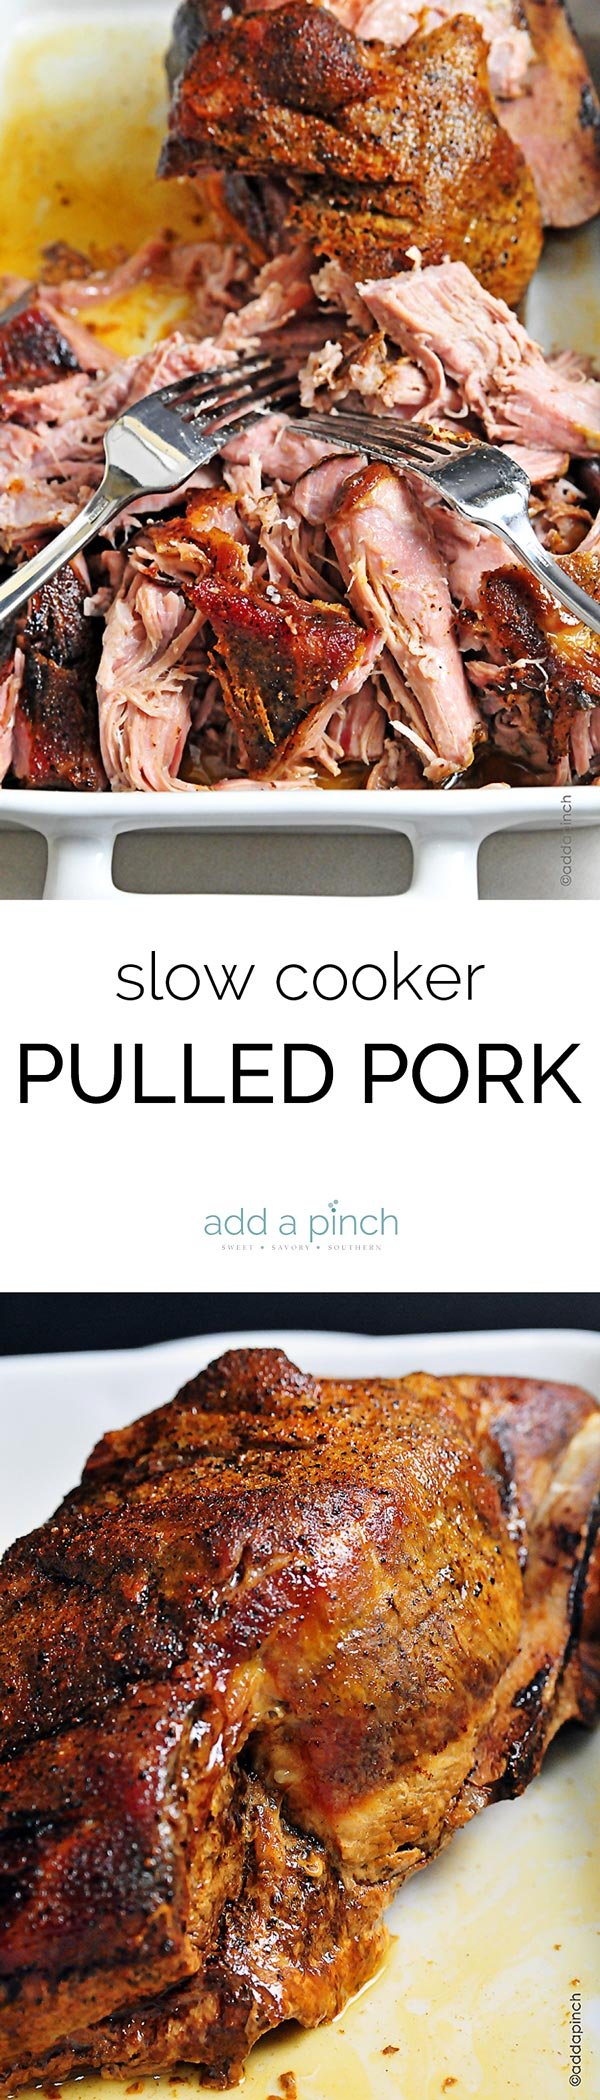 Slow Cooker Pulled Pork. A simple pork recipe prepared in the slow cooker. Easy and delicious for tons of favorite pulled pork recipes. // addapinch.com